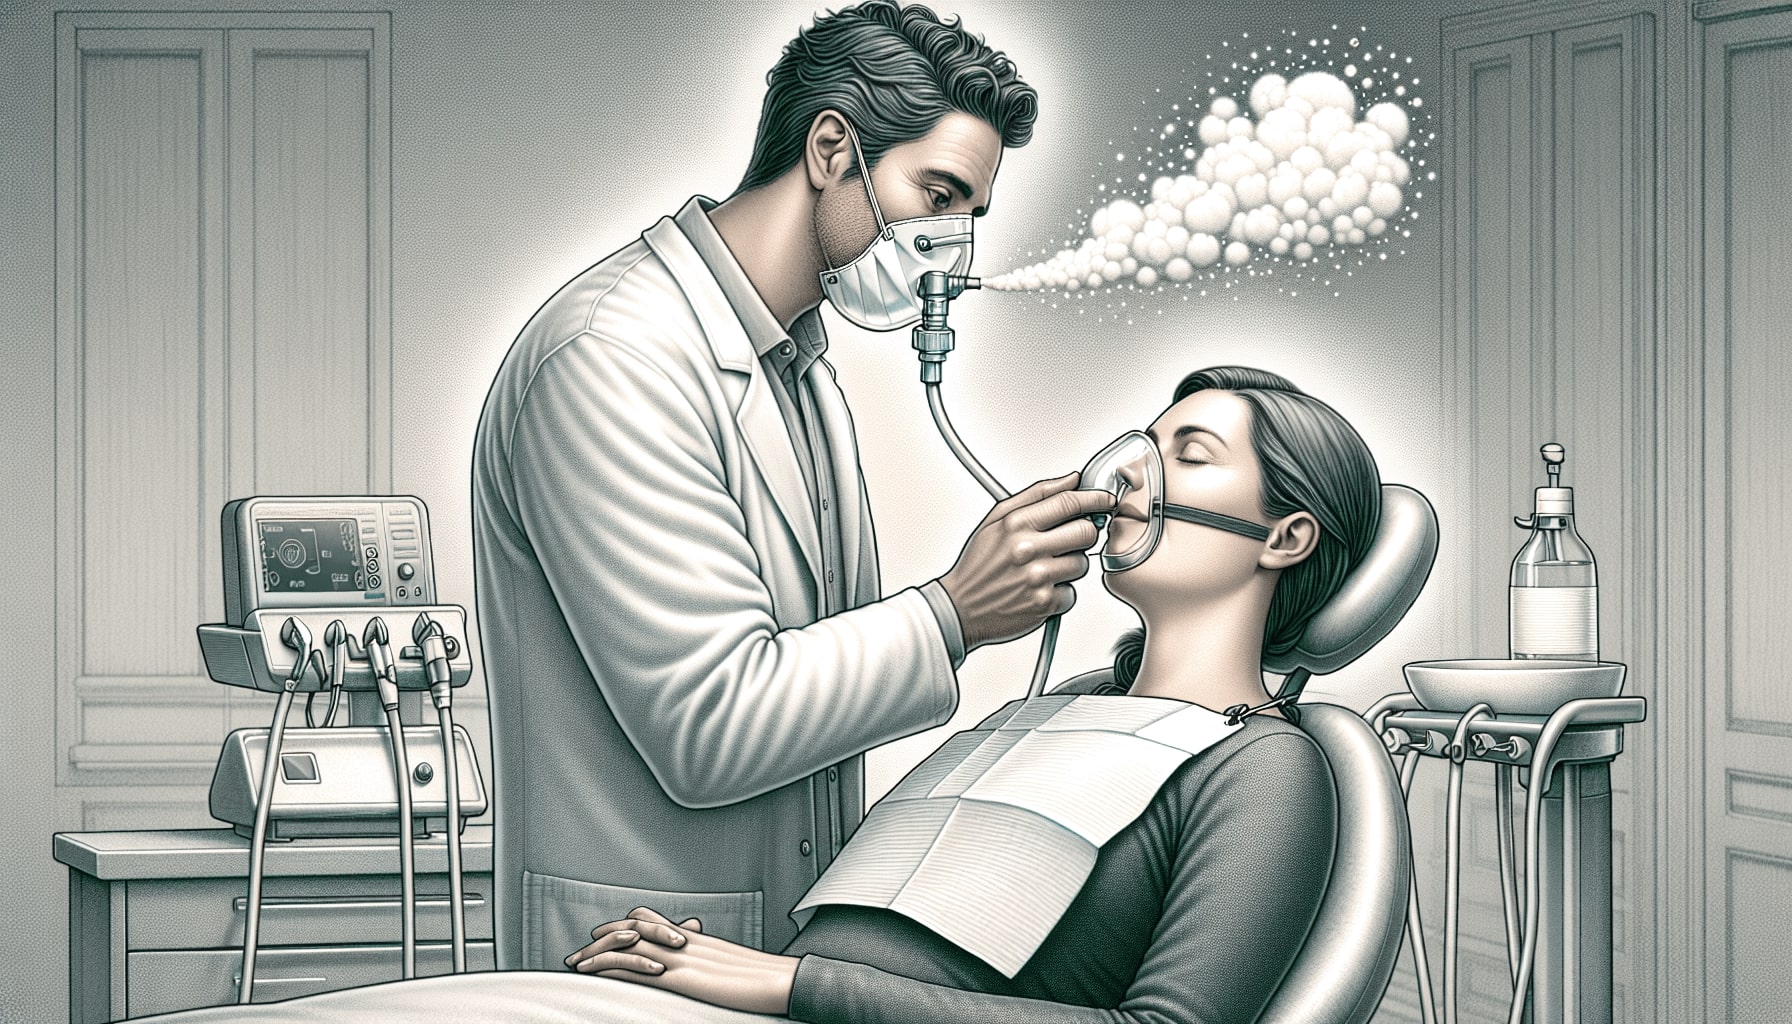 Illustration of a dentist administering nitrous oxide to a patient